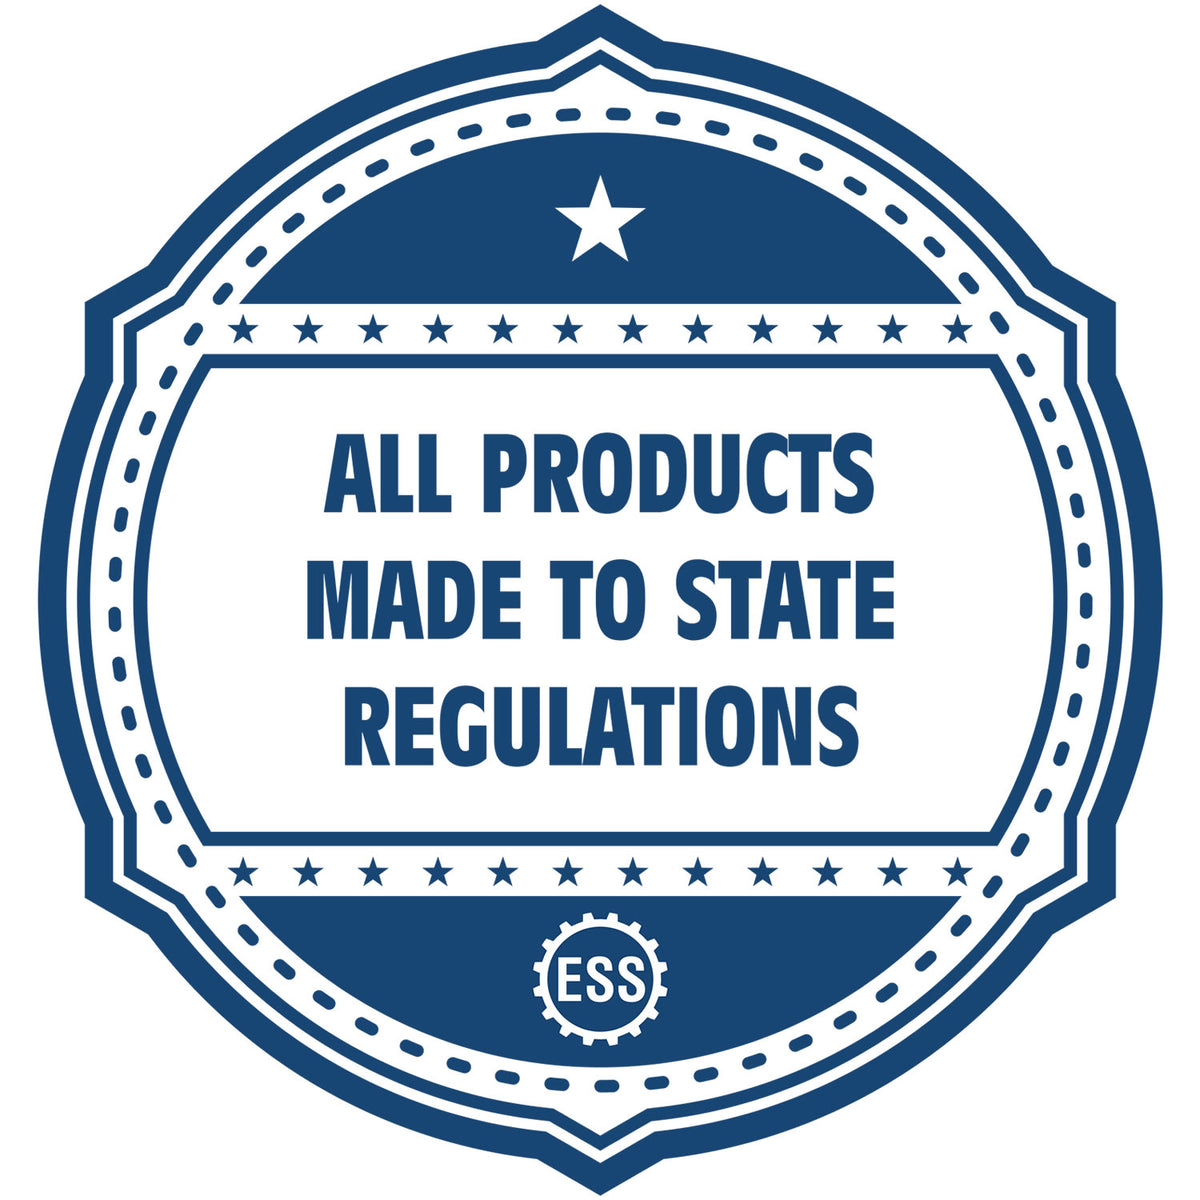 An icon or badge element for the State of Guam Architectural Seal Embosser showing that this product is made in compliance with state regulations.